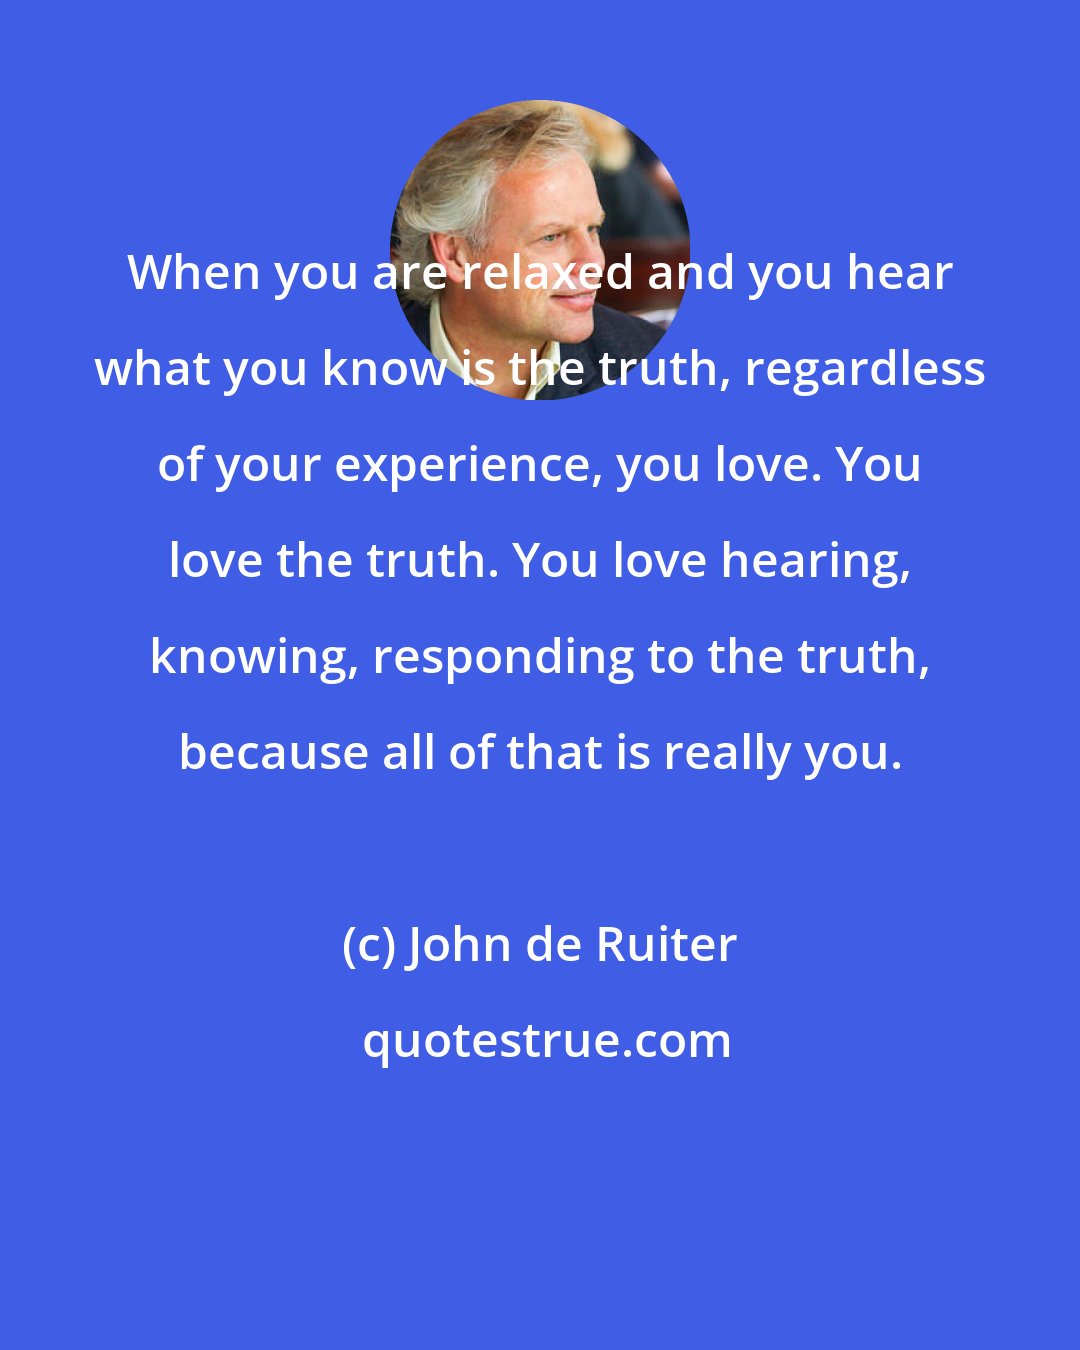 John de Ruiter: When you are relaxed and you hear what you know is the truth, regardless of your experience, you love. You love the truth. You love hearing, knowing, responding to the truth, because all of that is really you.